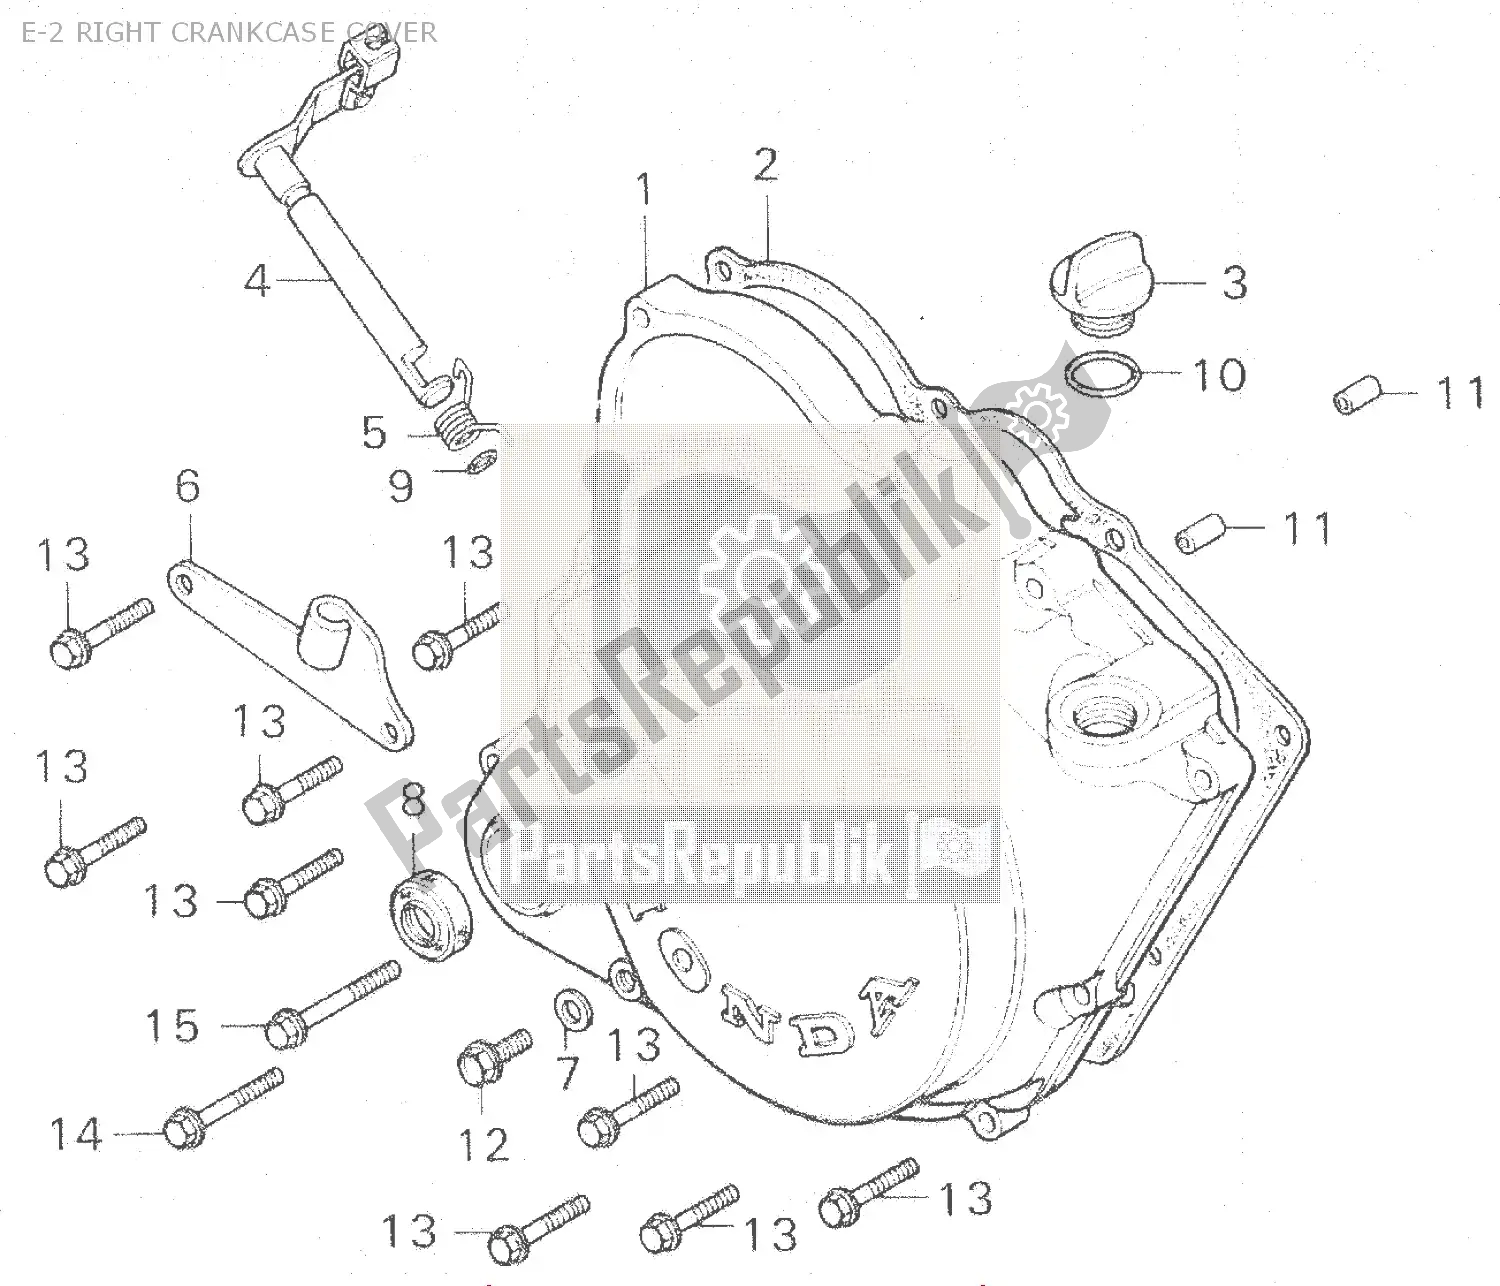 All parts for the E-2 Right Crankcase Cover of the Honda MB 100 1980